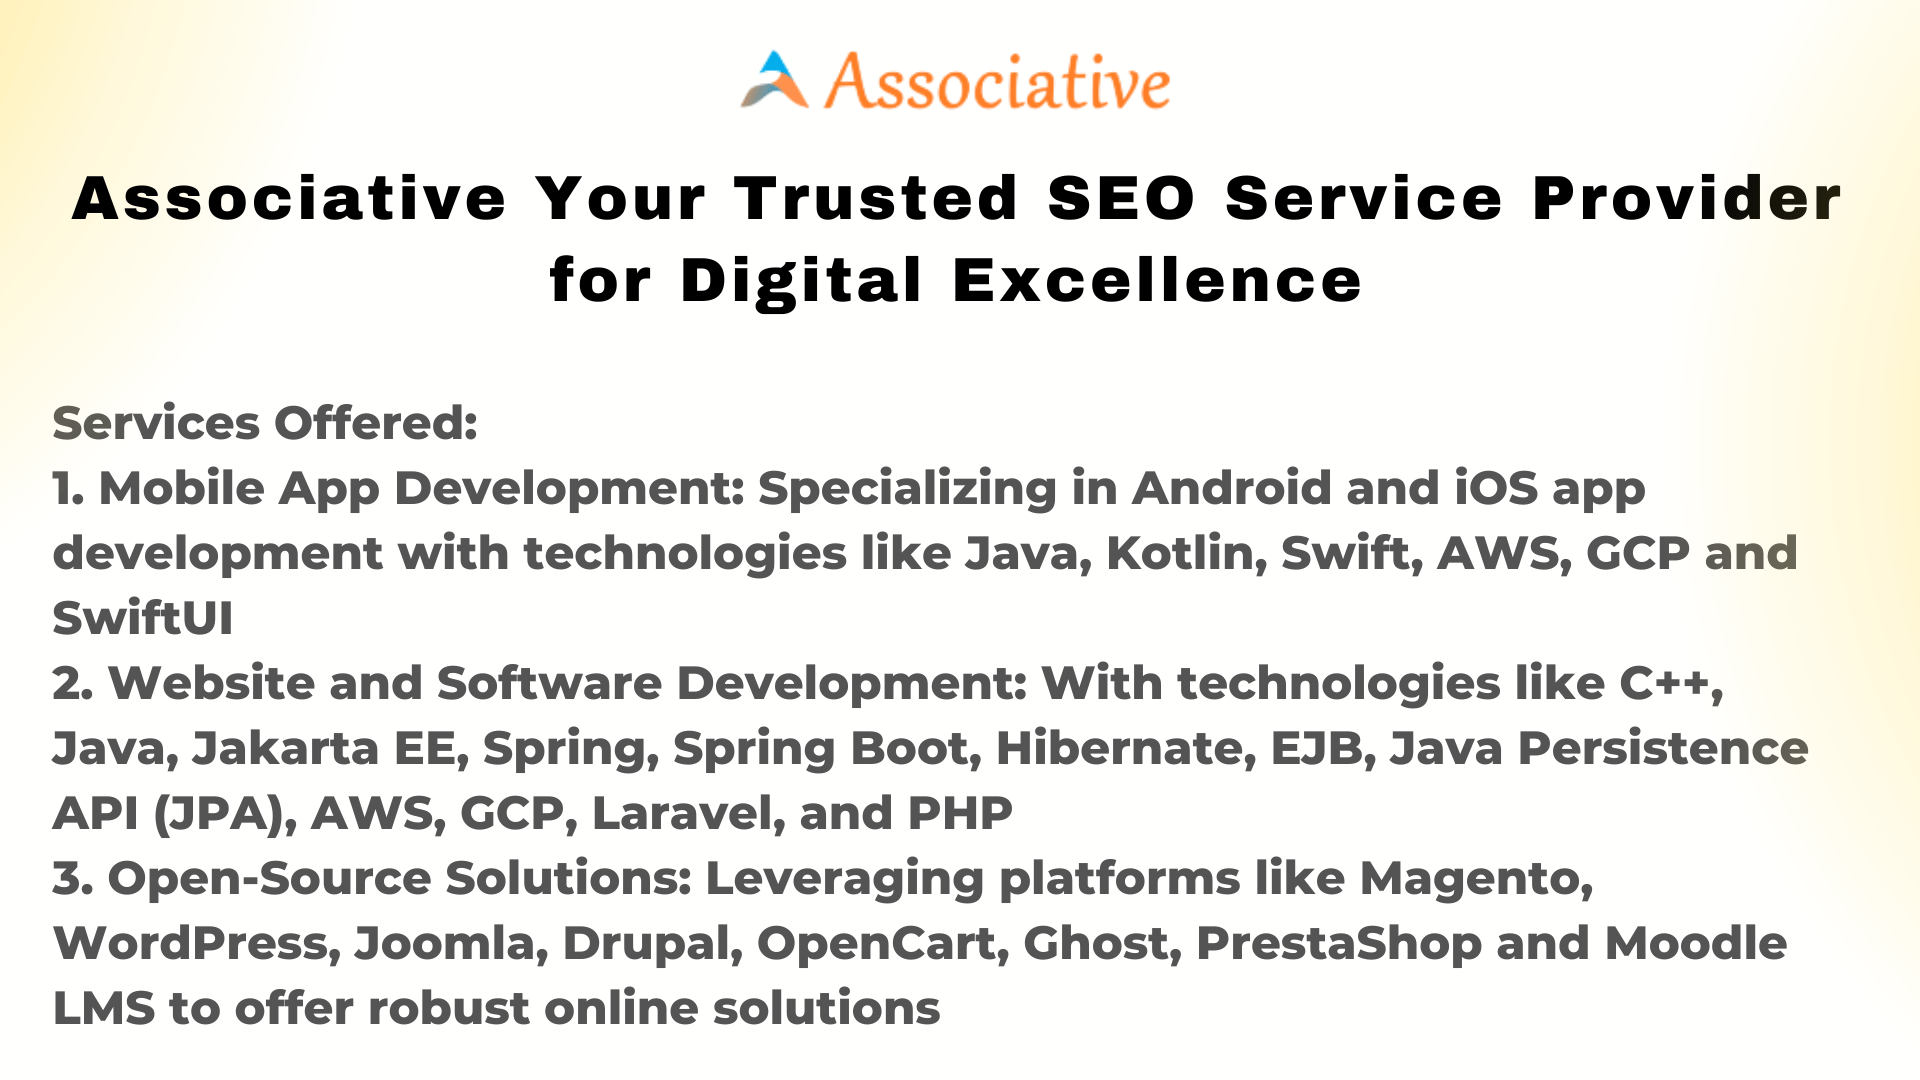 Associative Your Trusted SEO Service Provider for Digital Excellence